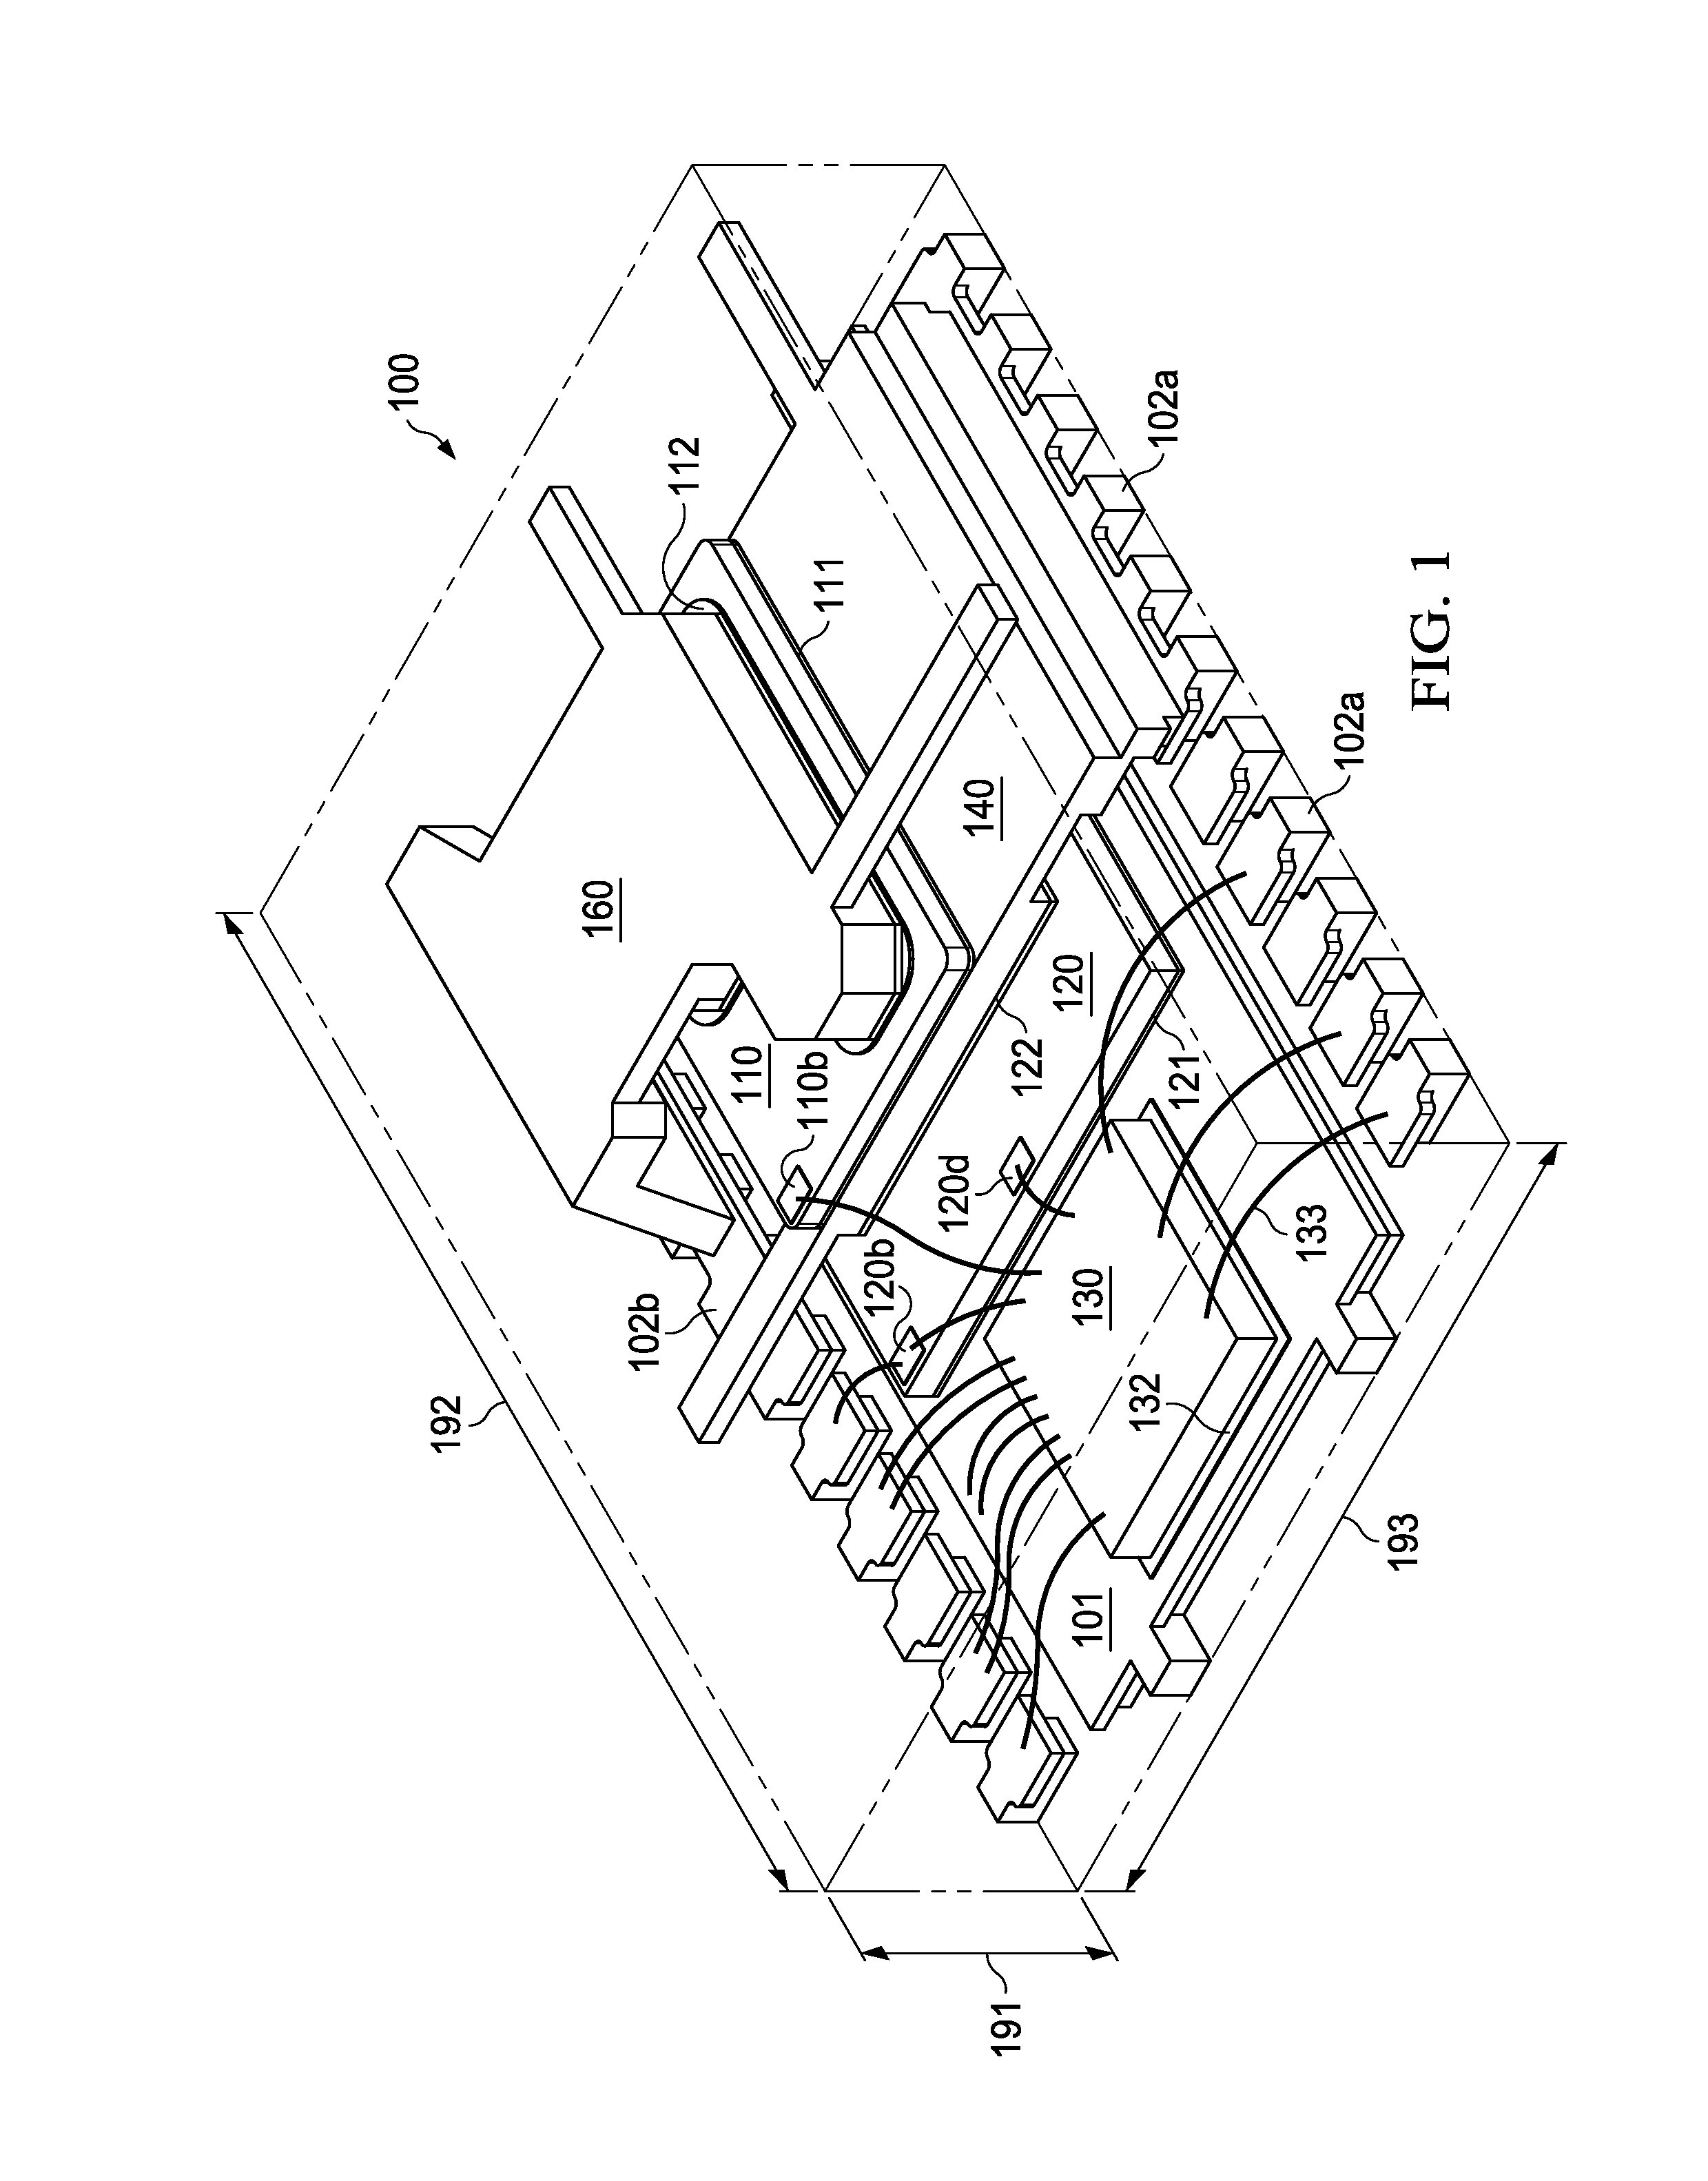 Stacked synchronous buck converter having chip embedded in outside recess of leadframe